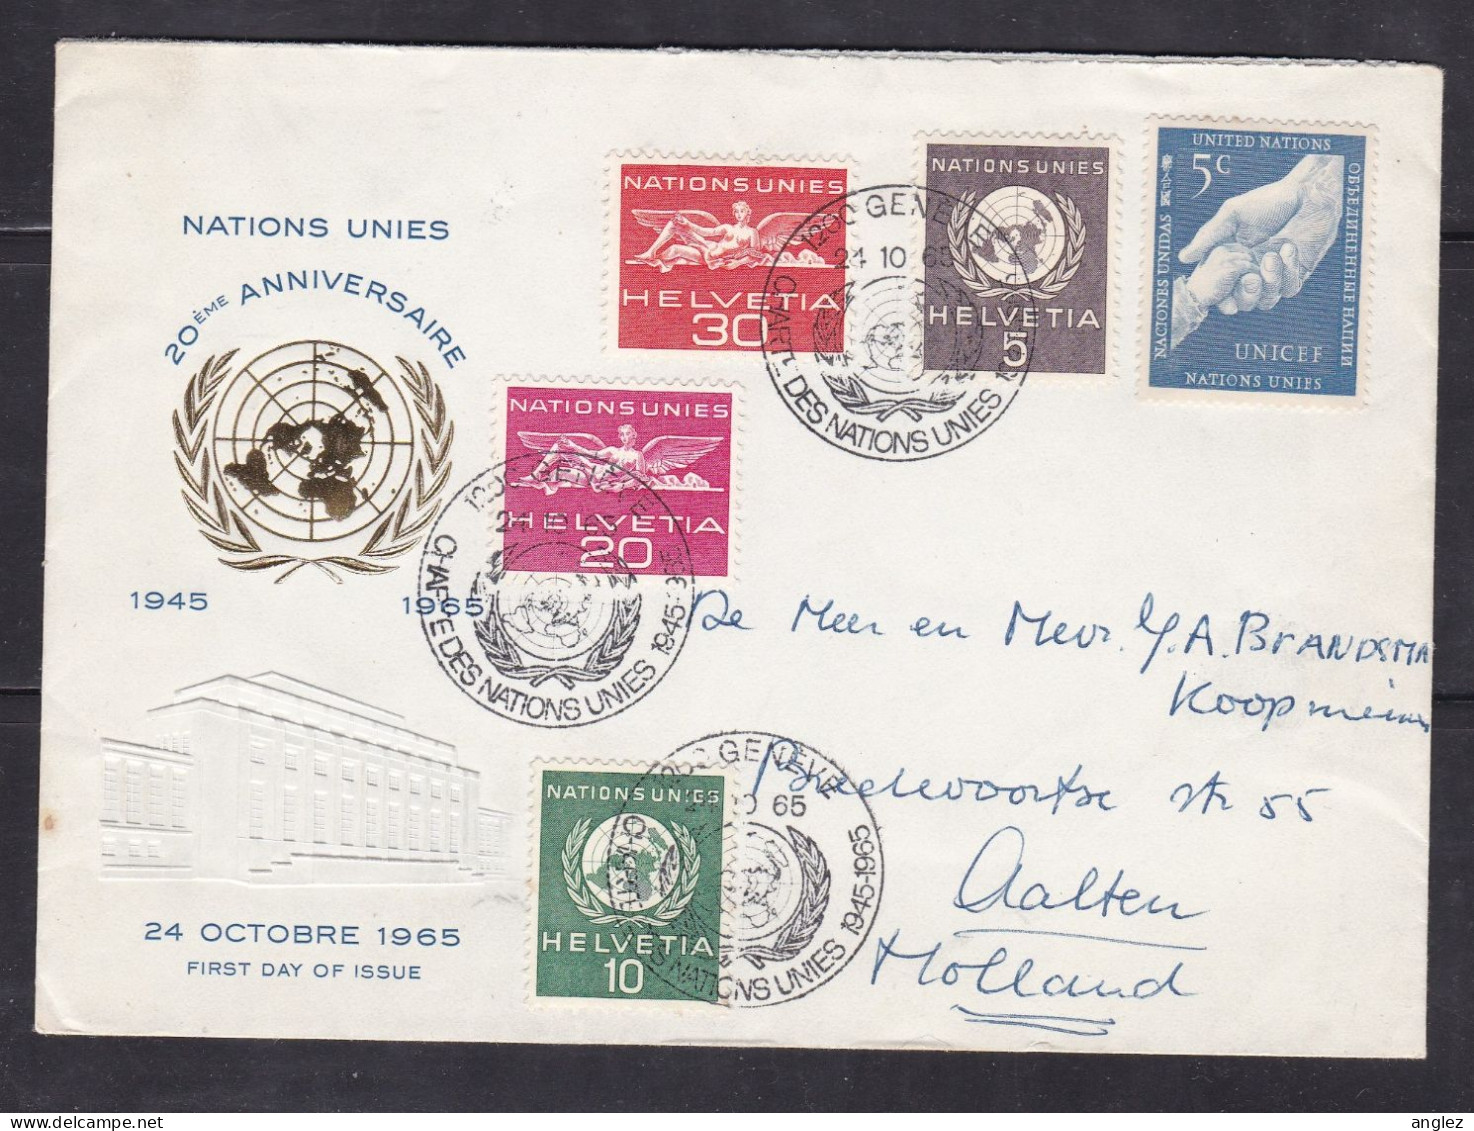 United Nations Geneva Office - 1965 20th Anniversary Cover - Multiple Franking - Covers & Documents